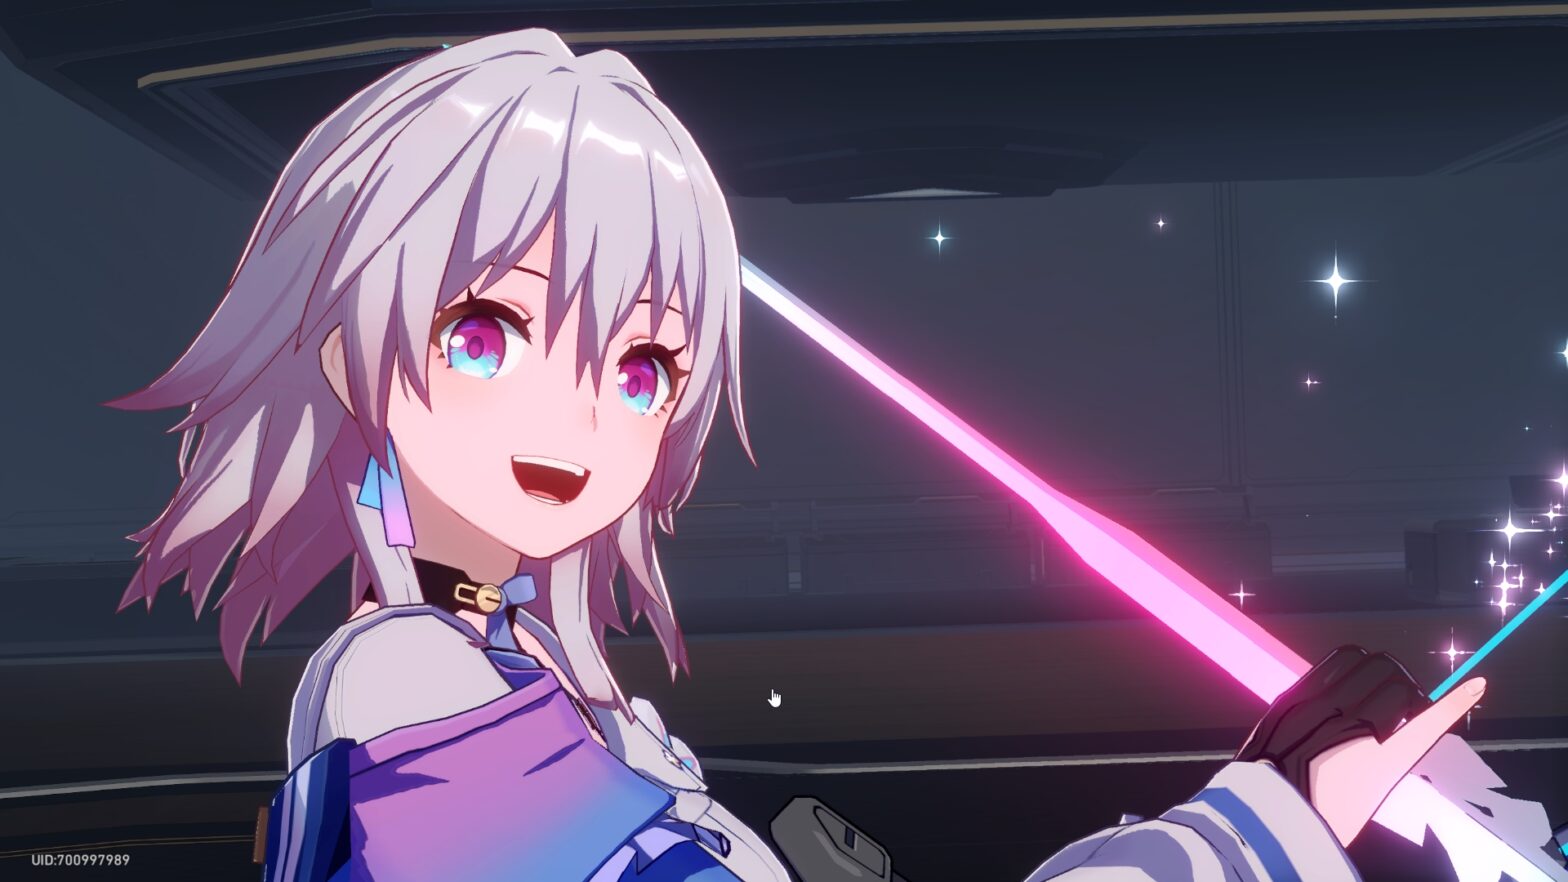 Honkai: Star Rail was reportedly downloaded 20 million times on its release  day